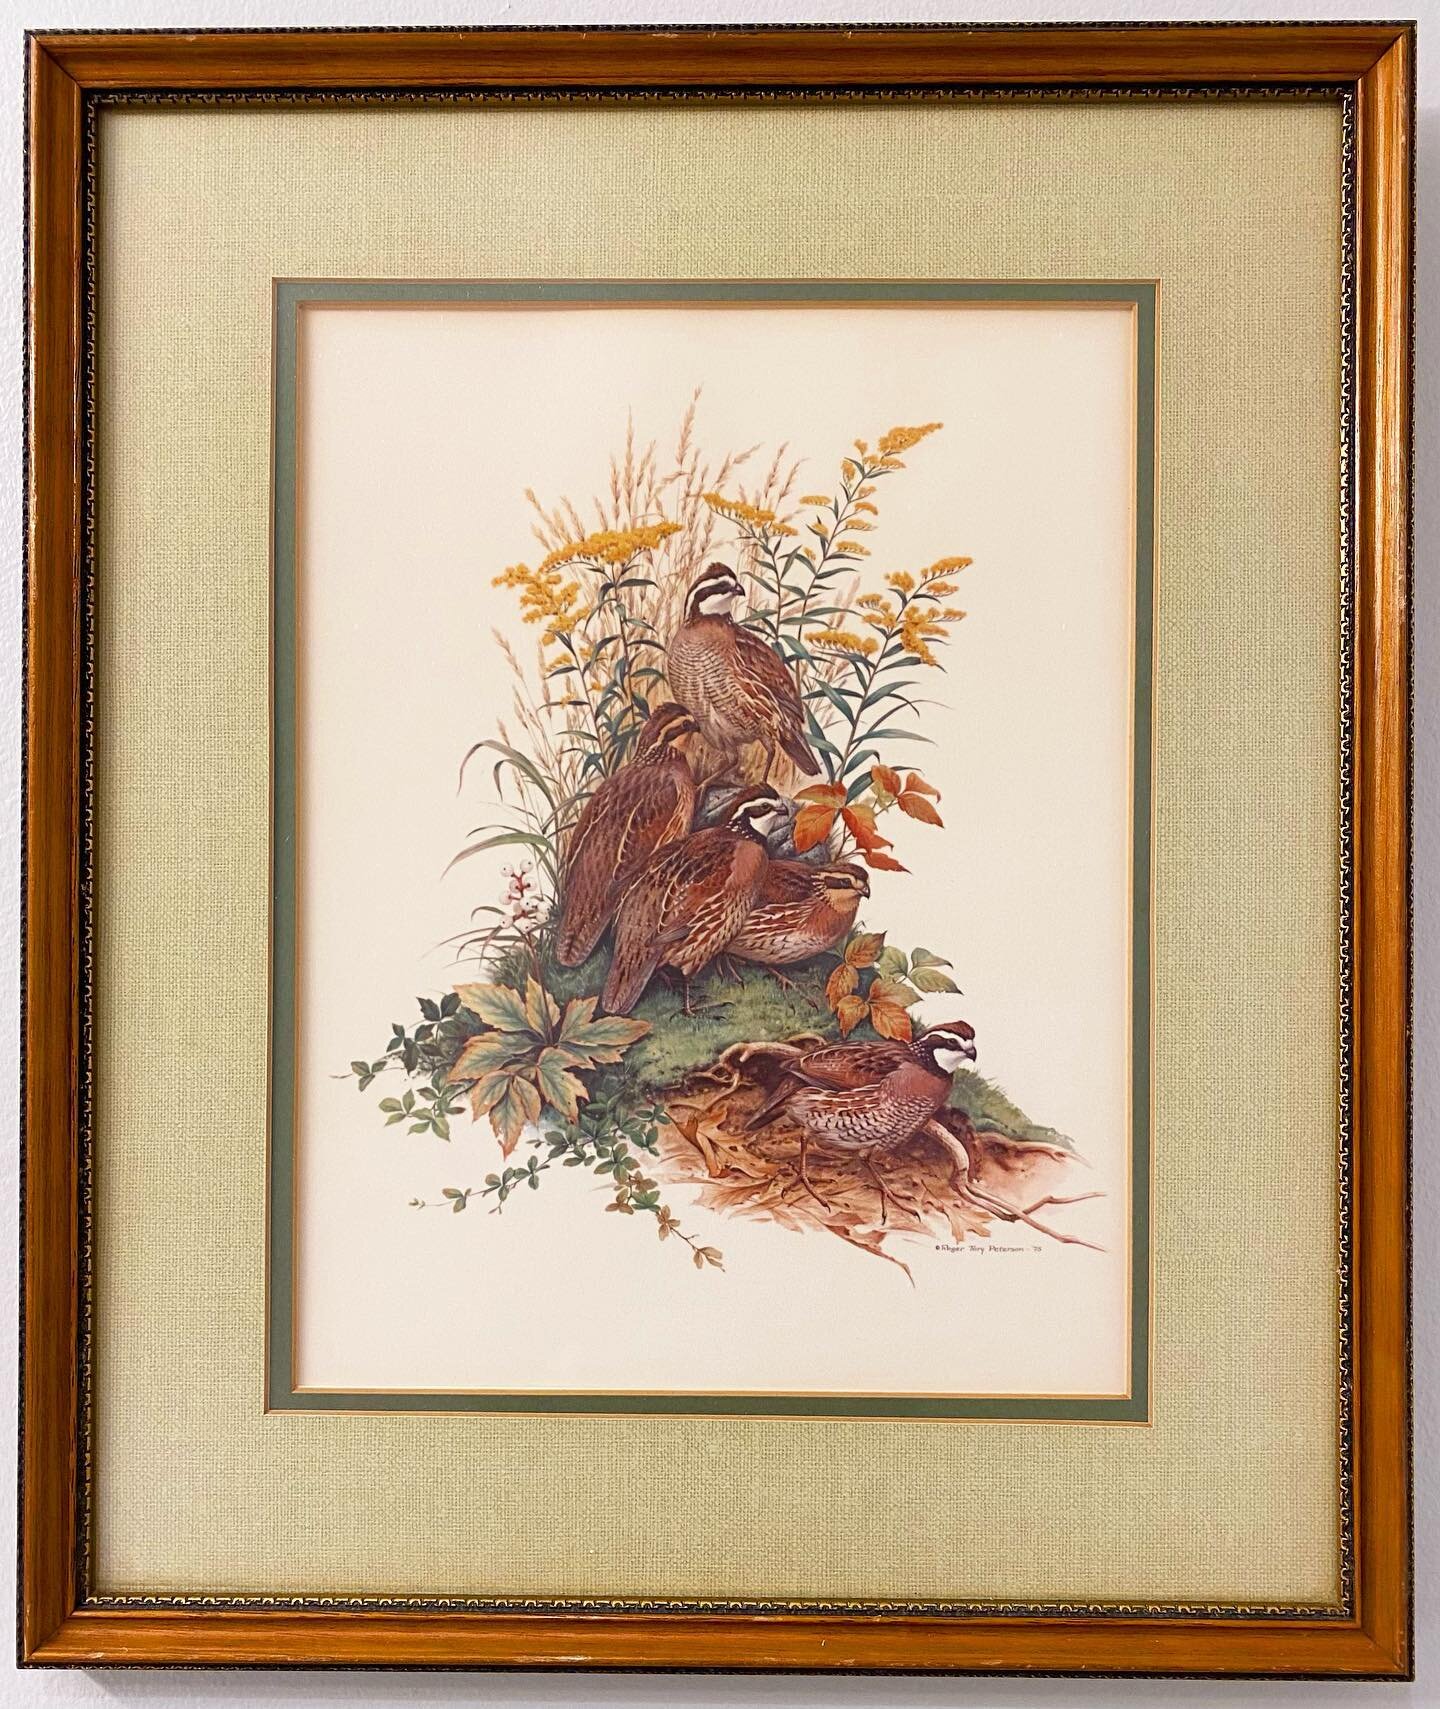 God Bless the Internets - framed Peterson bobwhite perfection and shipping for under $100, brought to you by the 1970s #bobwhite #bobwhitequail #colinusvirginianus #rtpeterson #rogertorypeterson